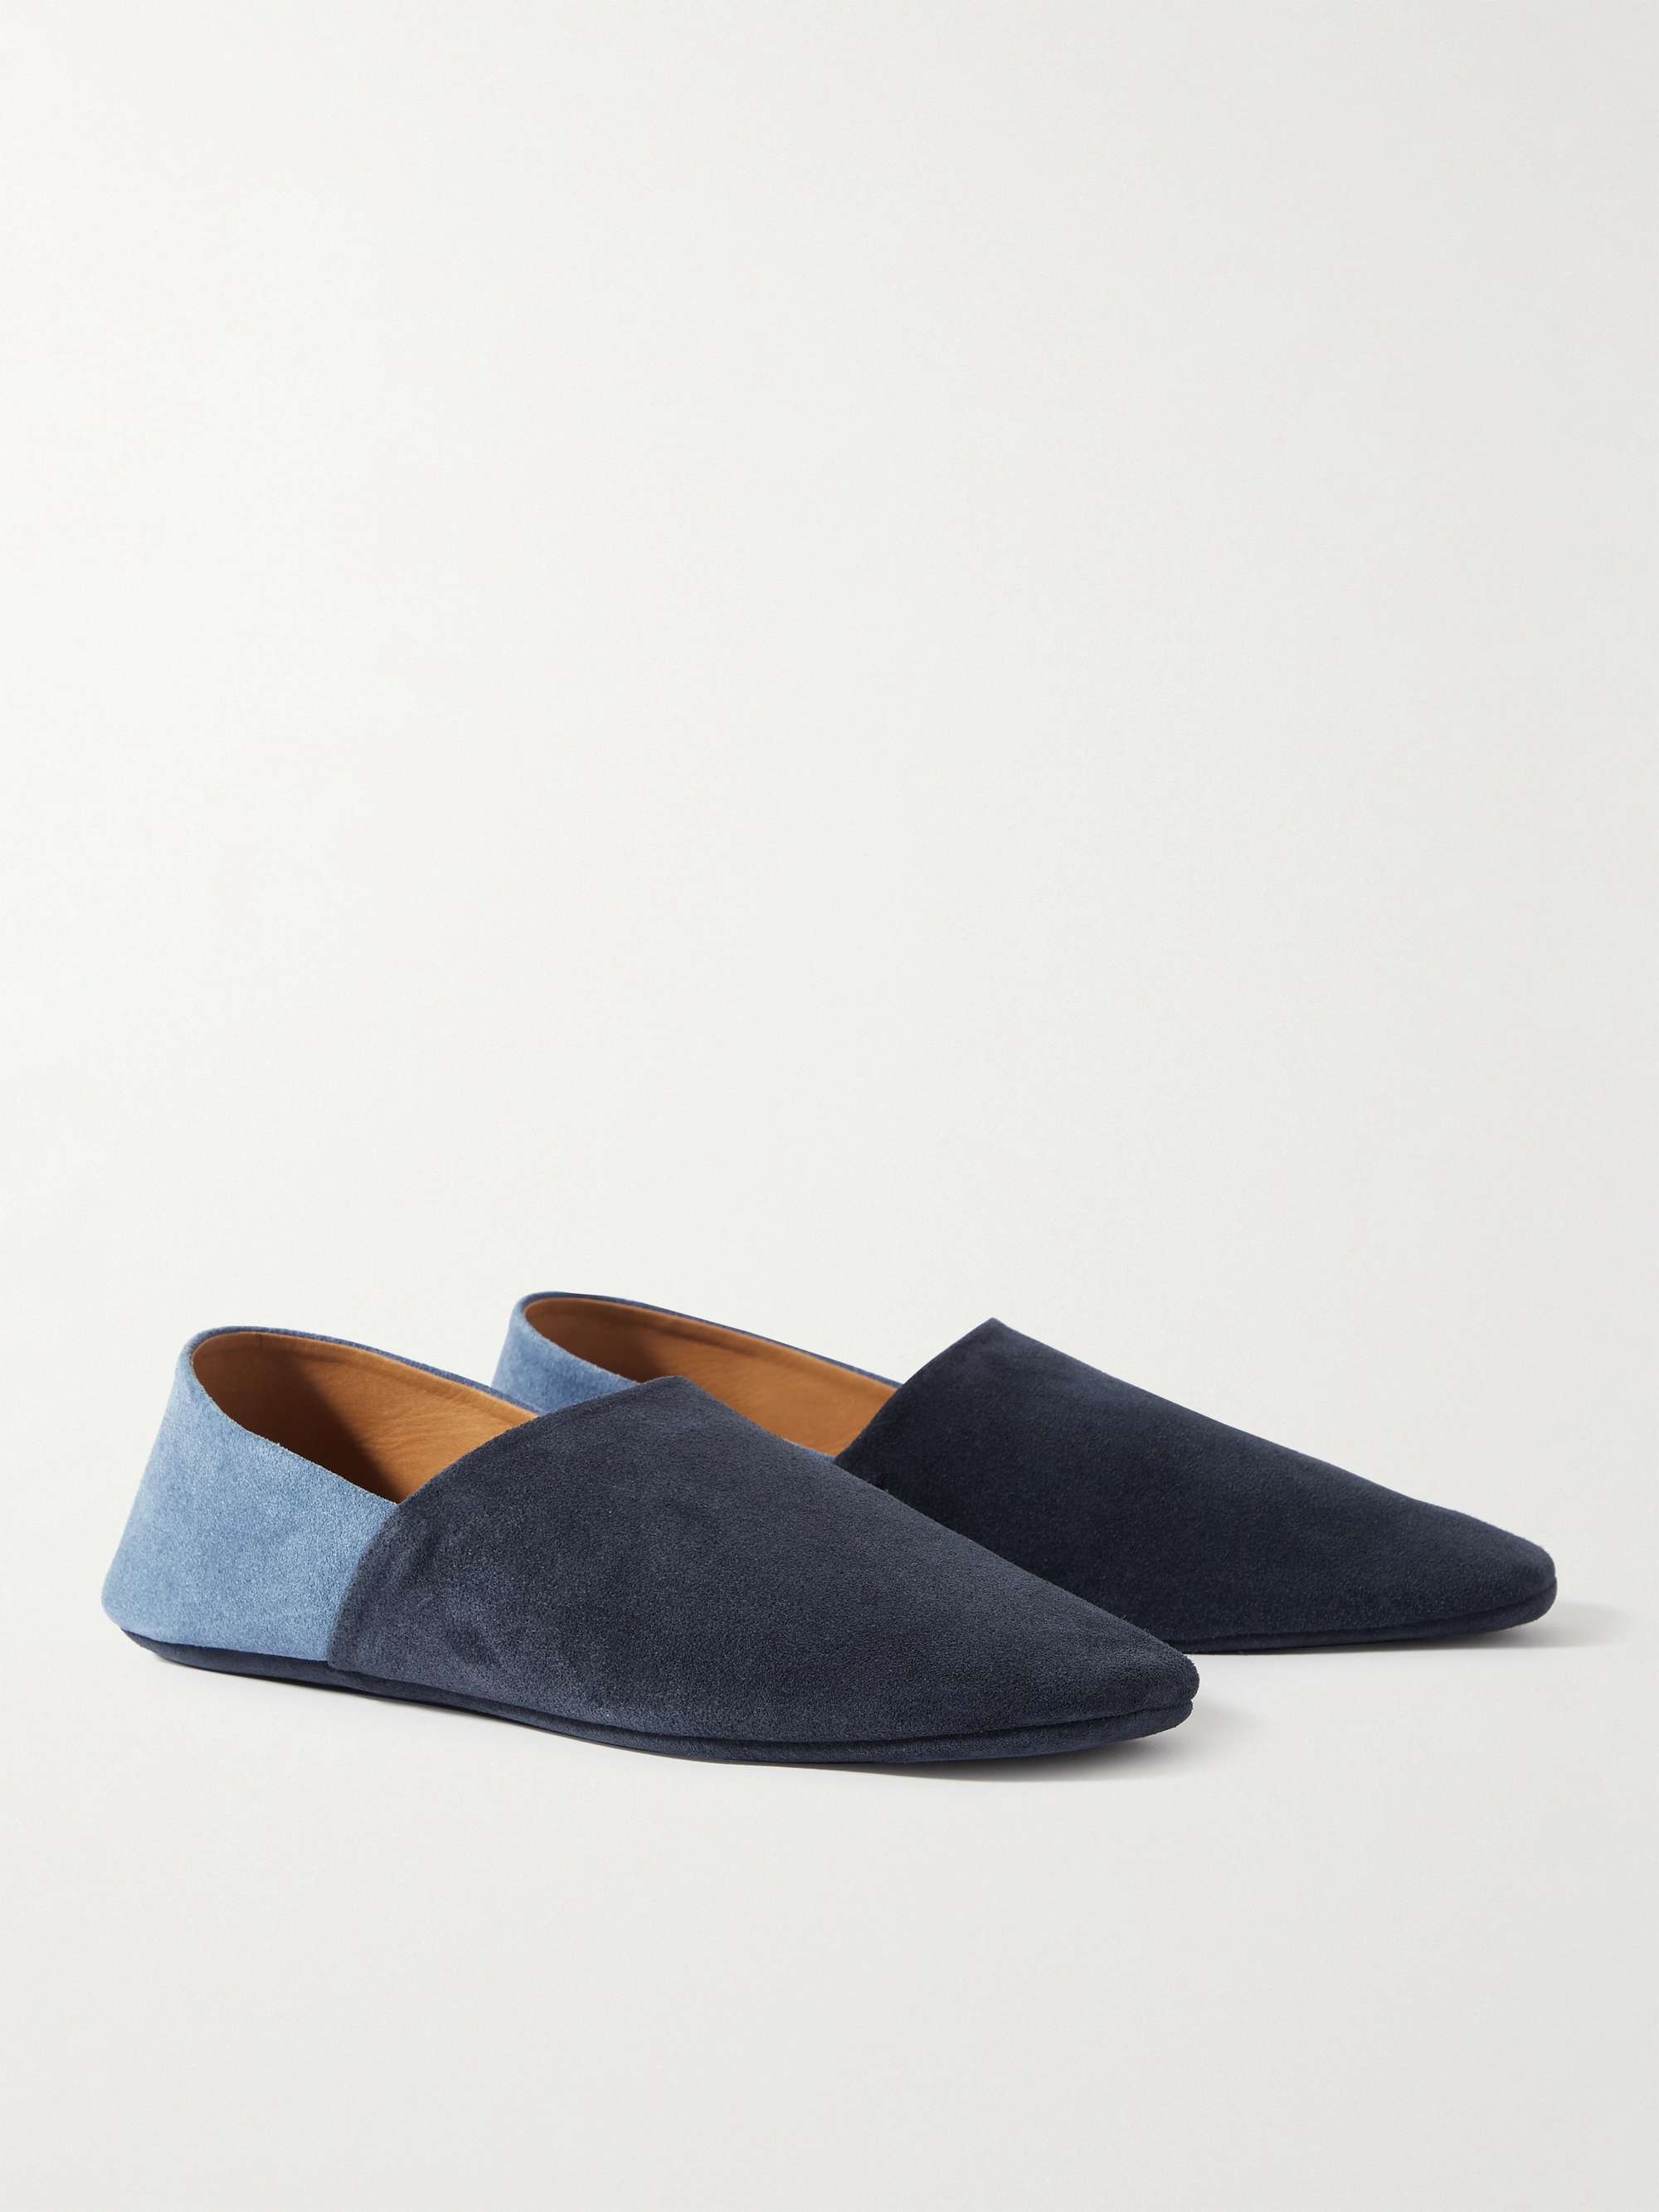 MR P. Collapsible-Heel Two-Tone Suede Travel Slippers